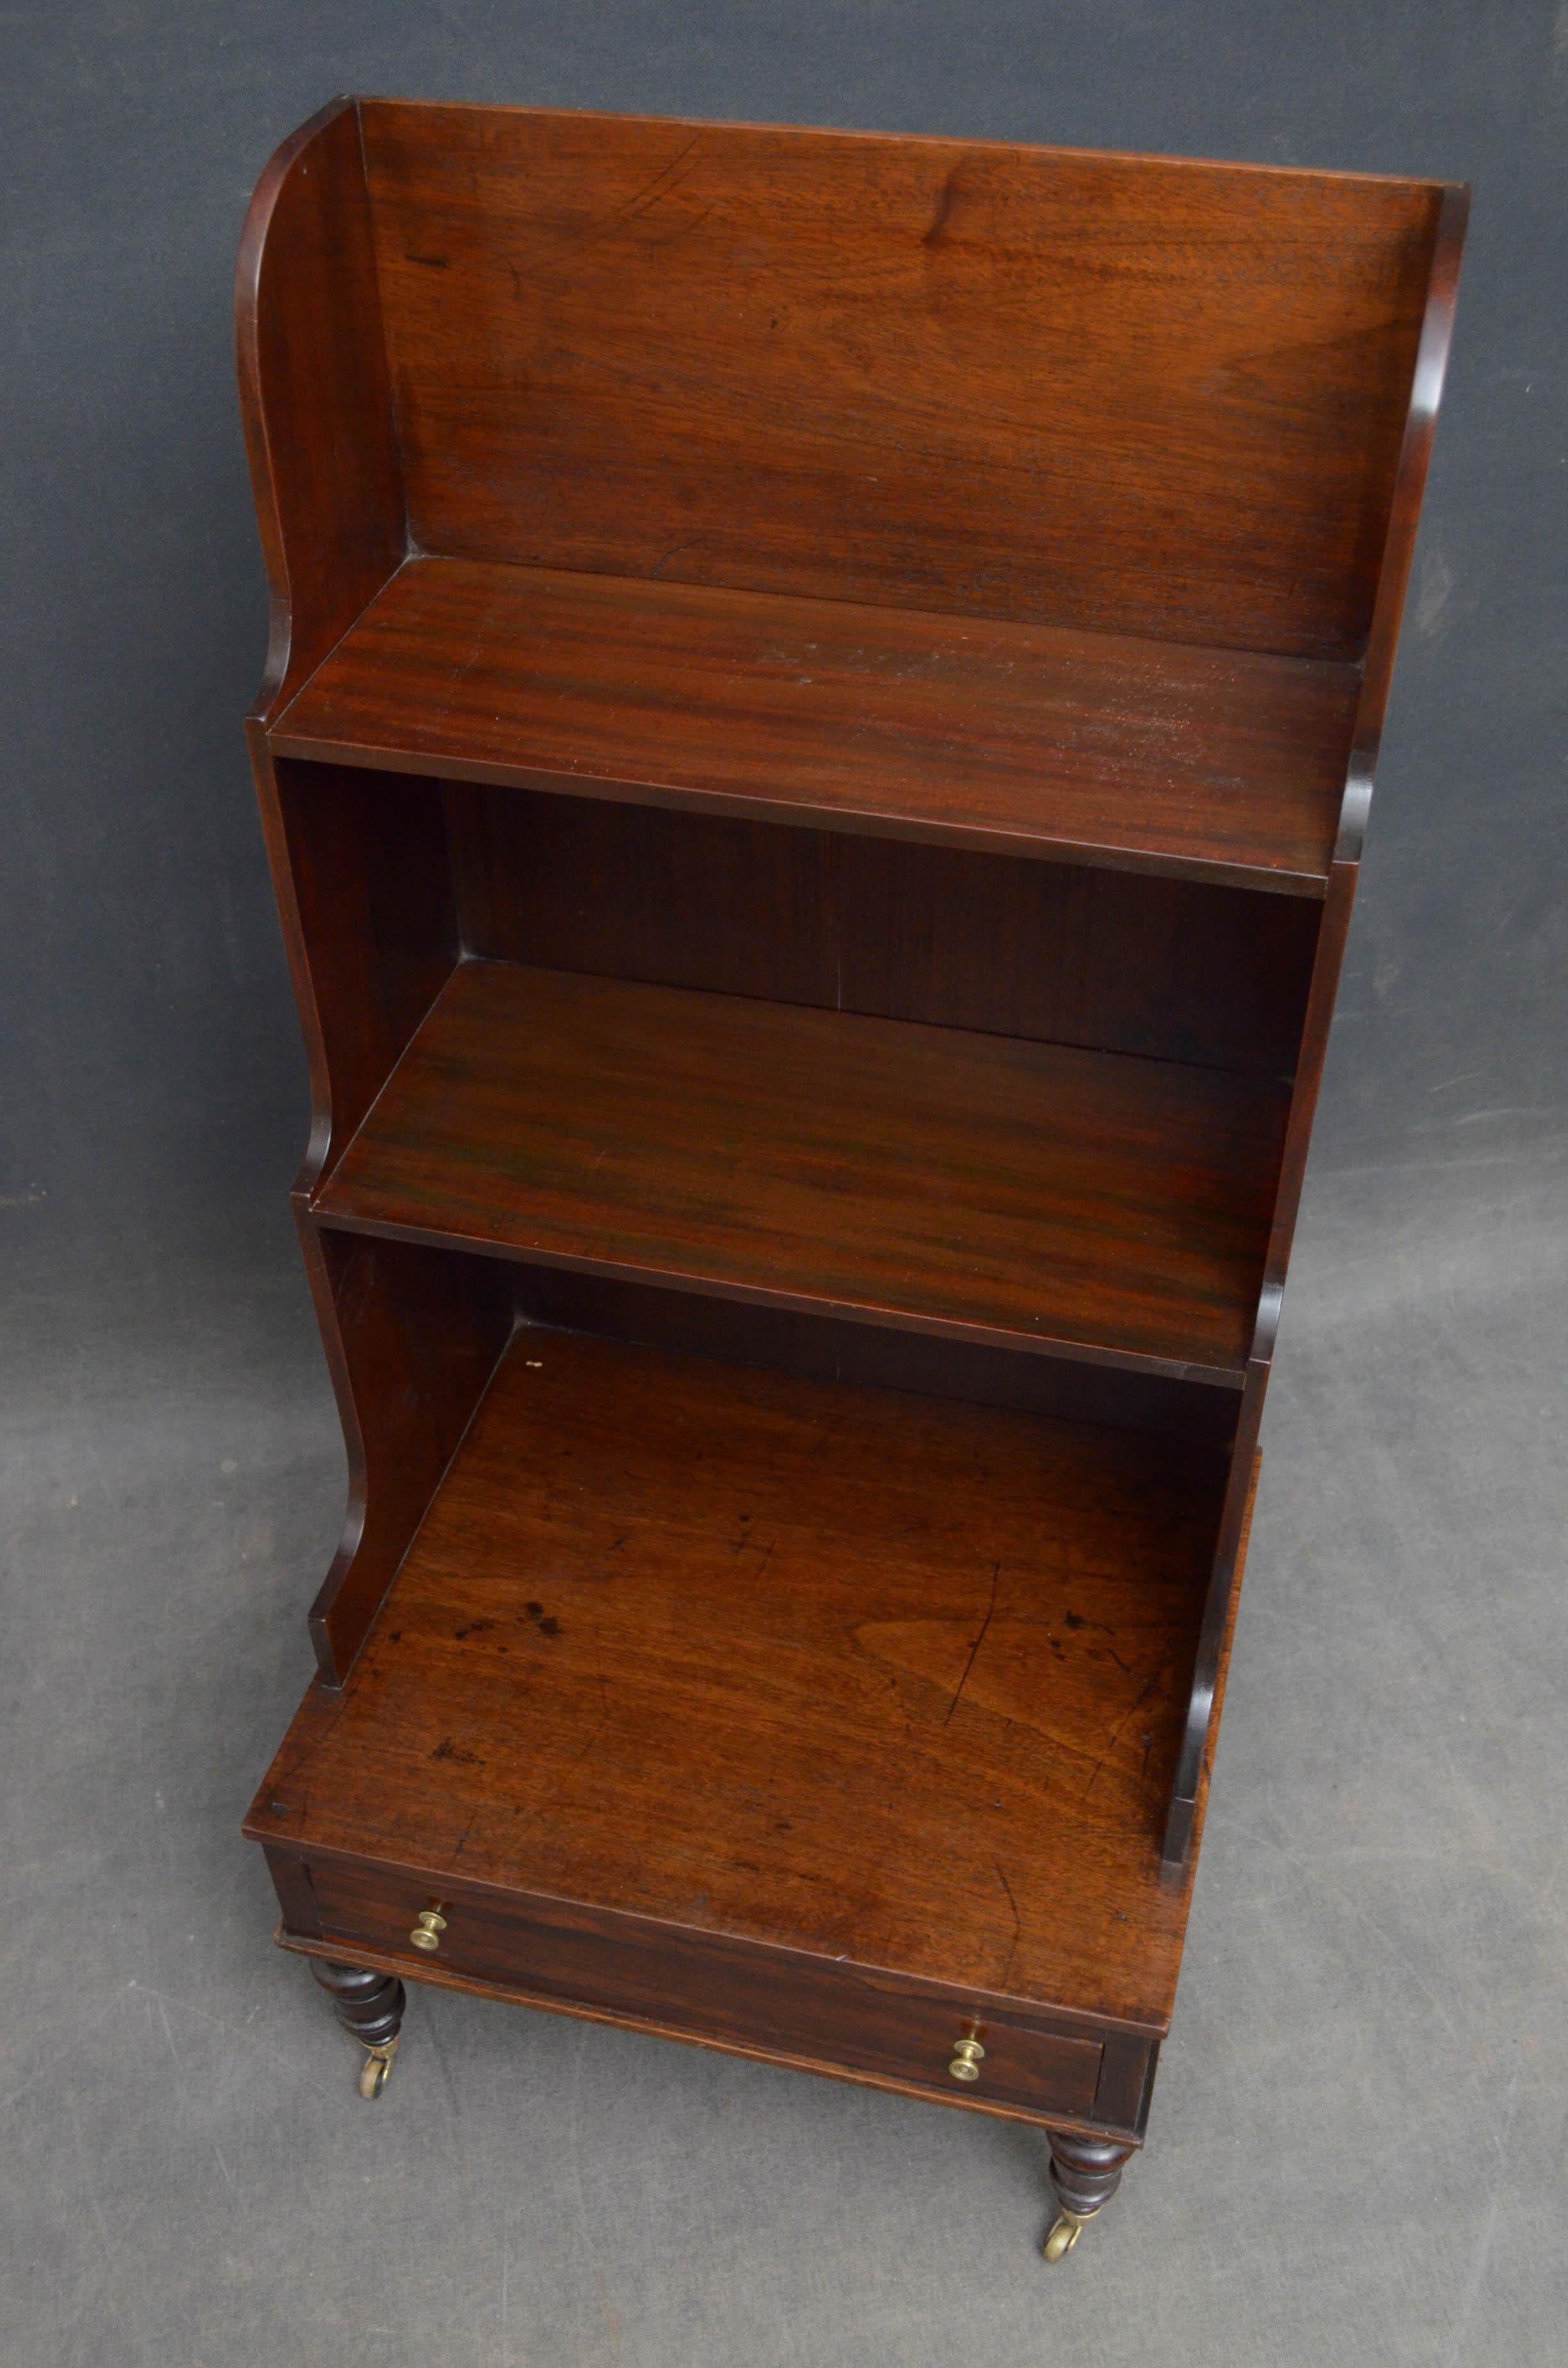 Sn4705 William IV mahogany and simulated rosewood waterfall bookcase with mahogany lined drawer to the base and turned legs terminating in original brass castors. This bookcase retains its original finish and is ready to place at home, circa